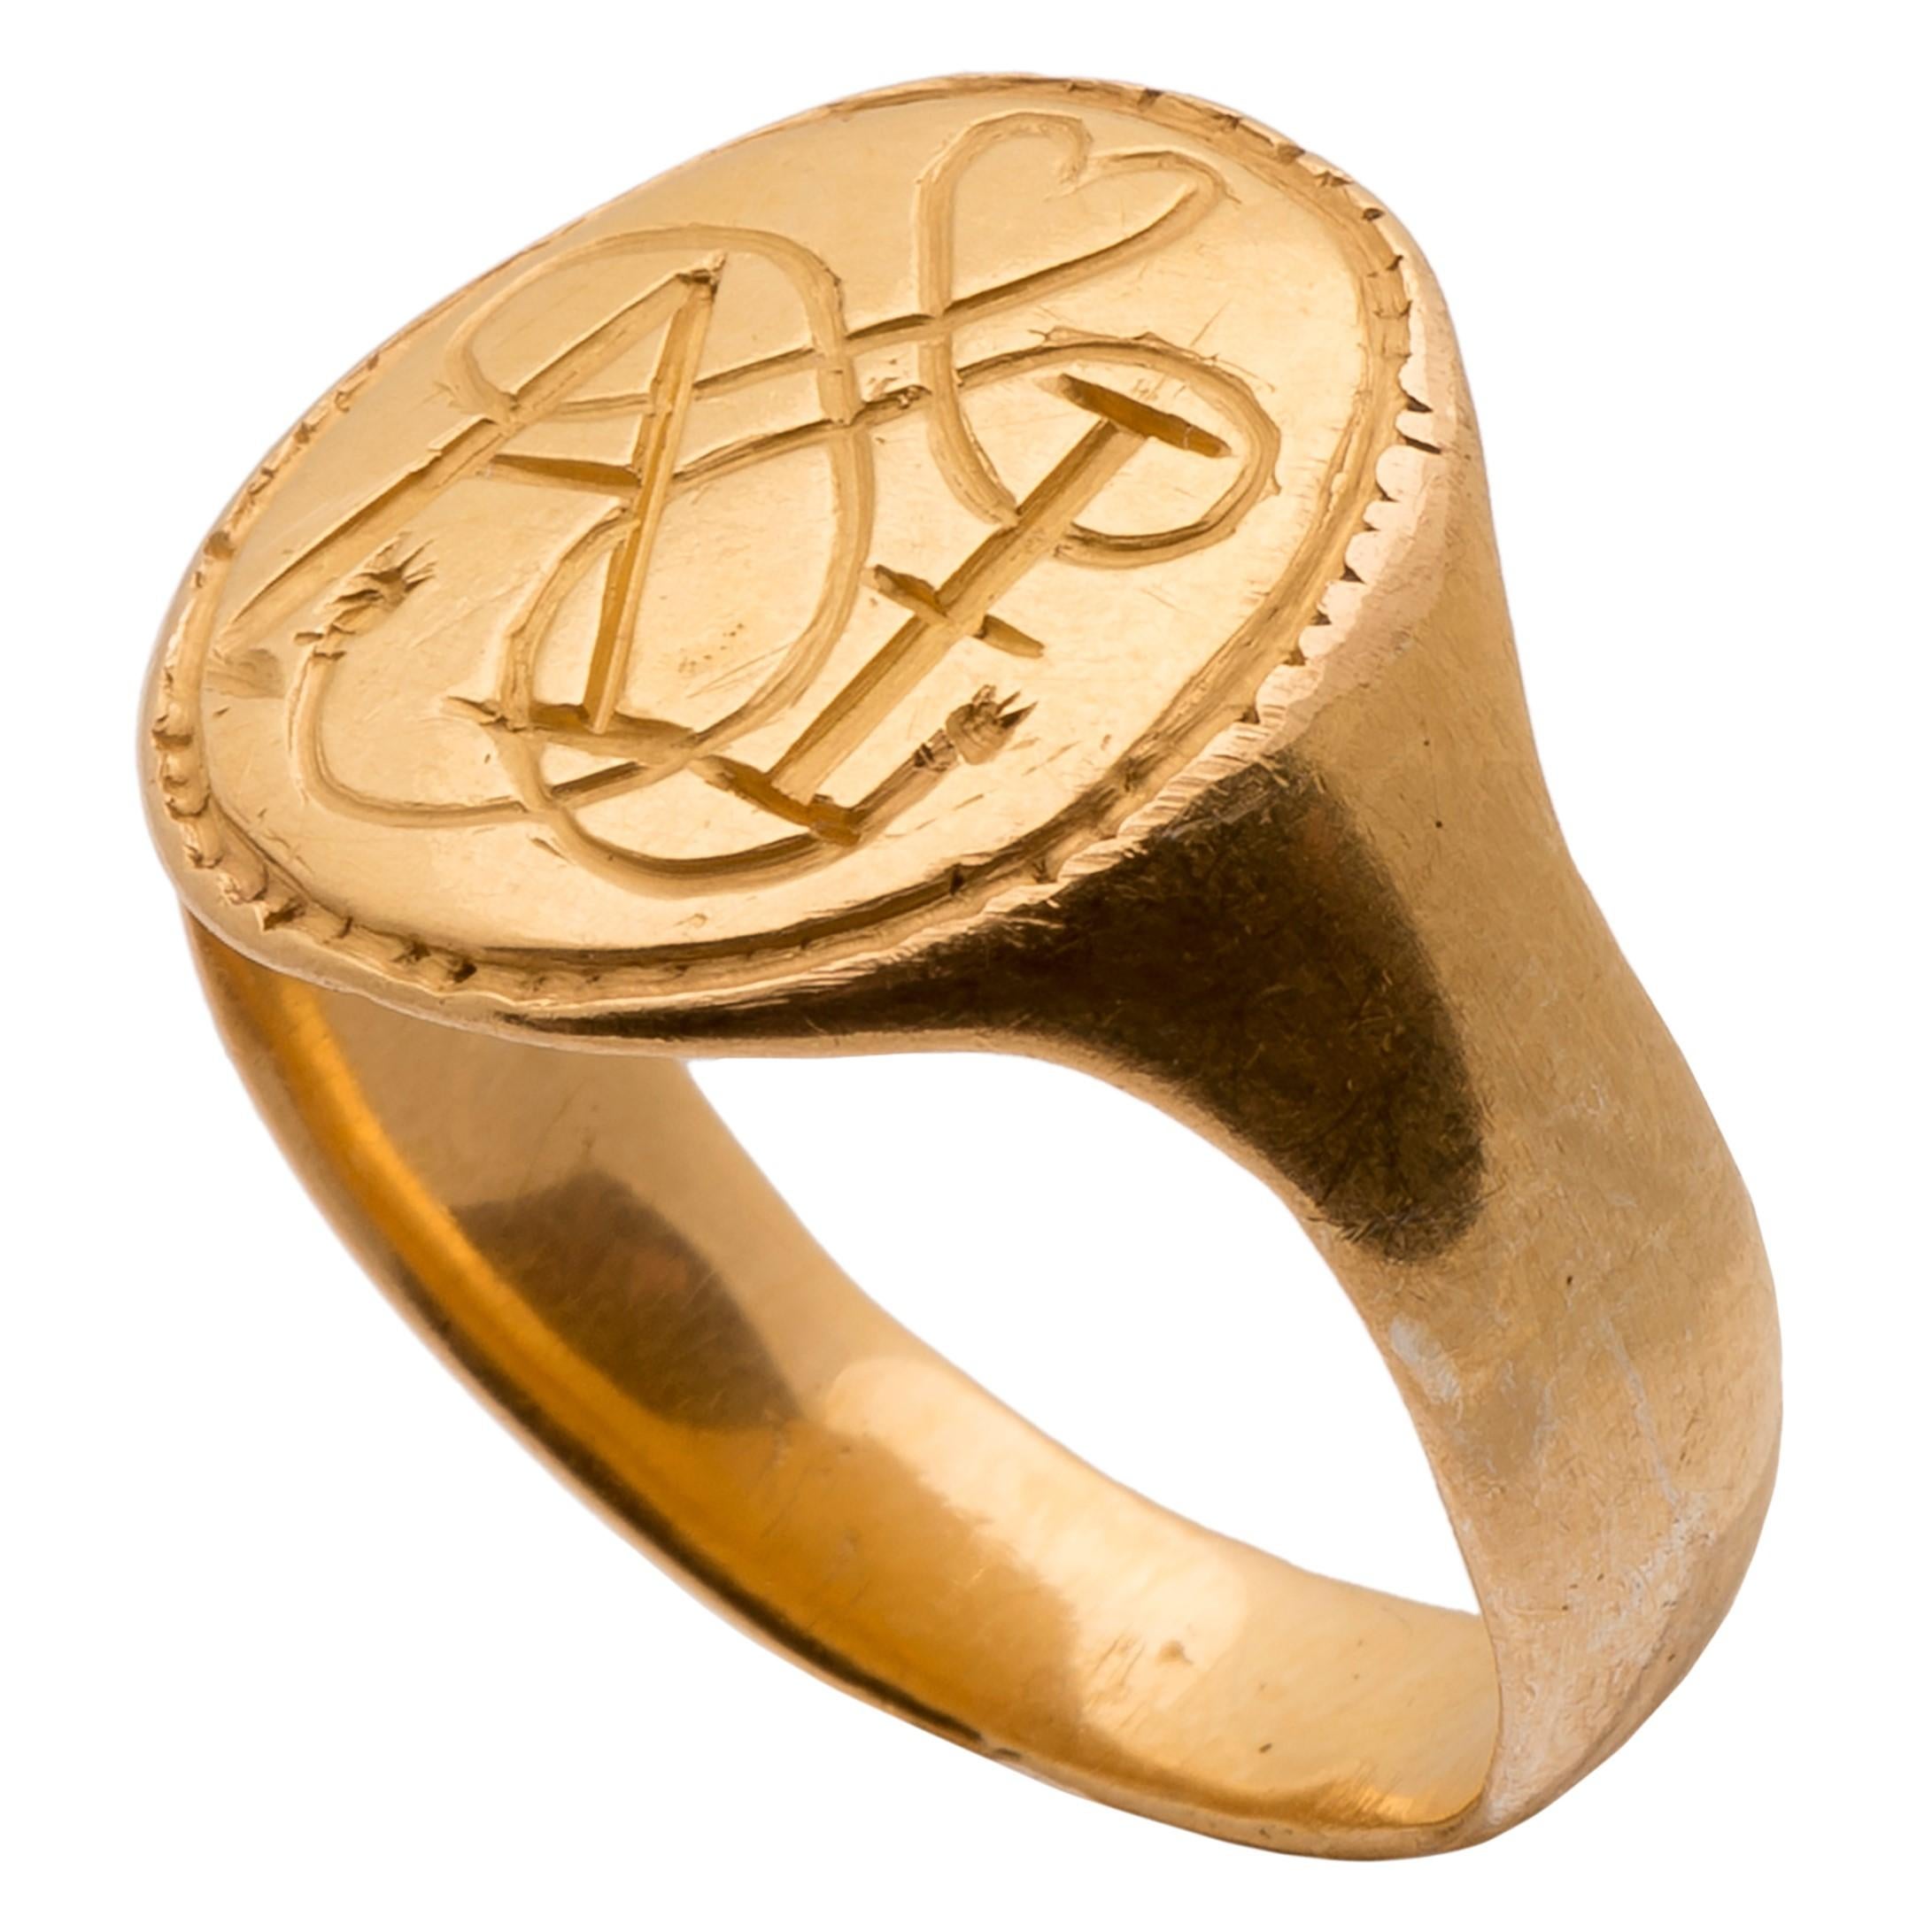 Signet Ring with True Lover’s Knot and the Initials “AI”
England, 17th century 
Gold
Weight 9 gr.; bezel 15.3 x 16.1 x 1.5 mm.; circumference: 58.21 mm.; US size 8.5; UK size Q ¾

The wide gold hoop is plain, flat inside and slightly rounded on the